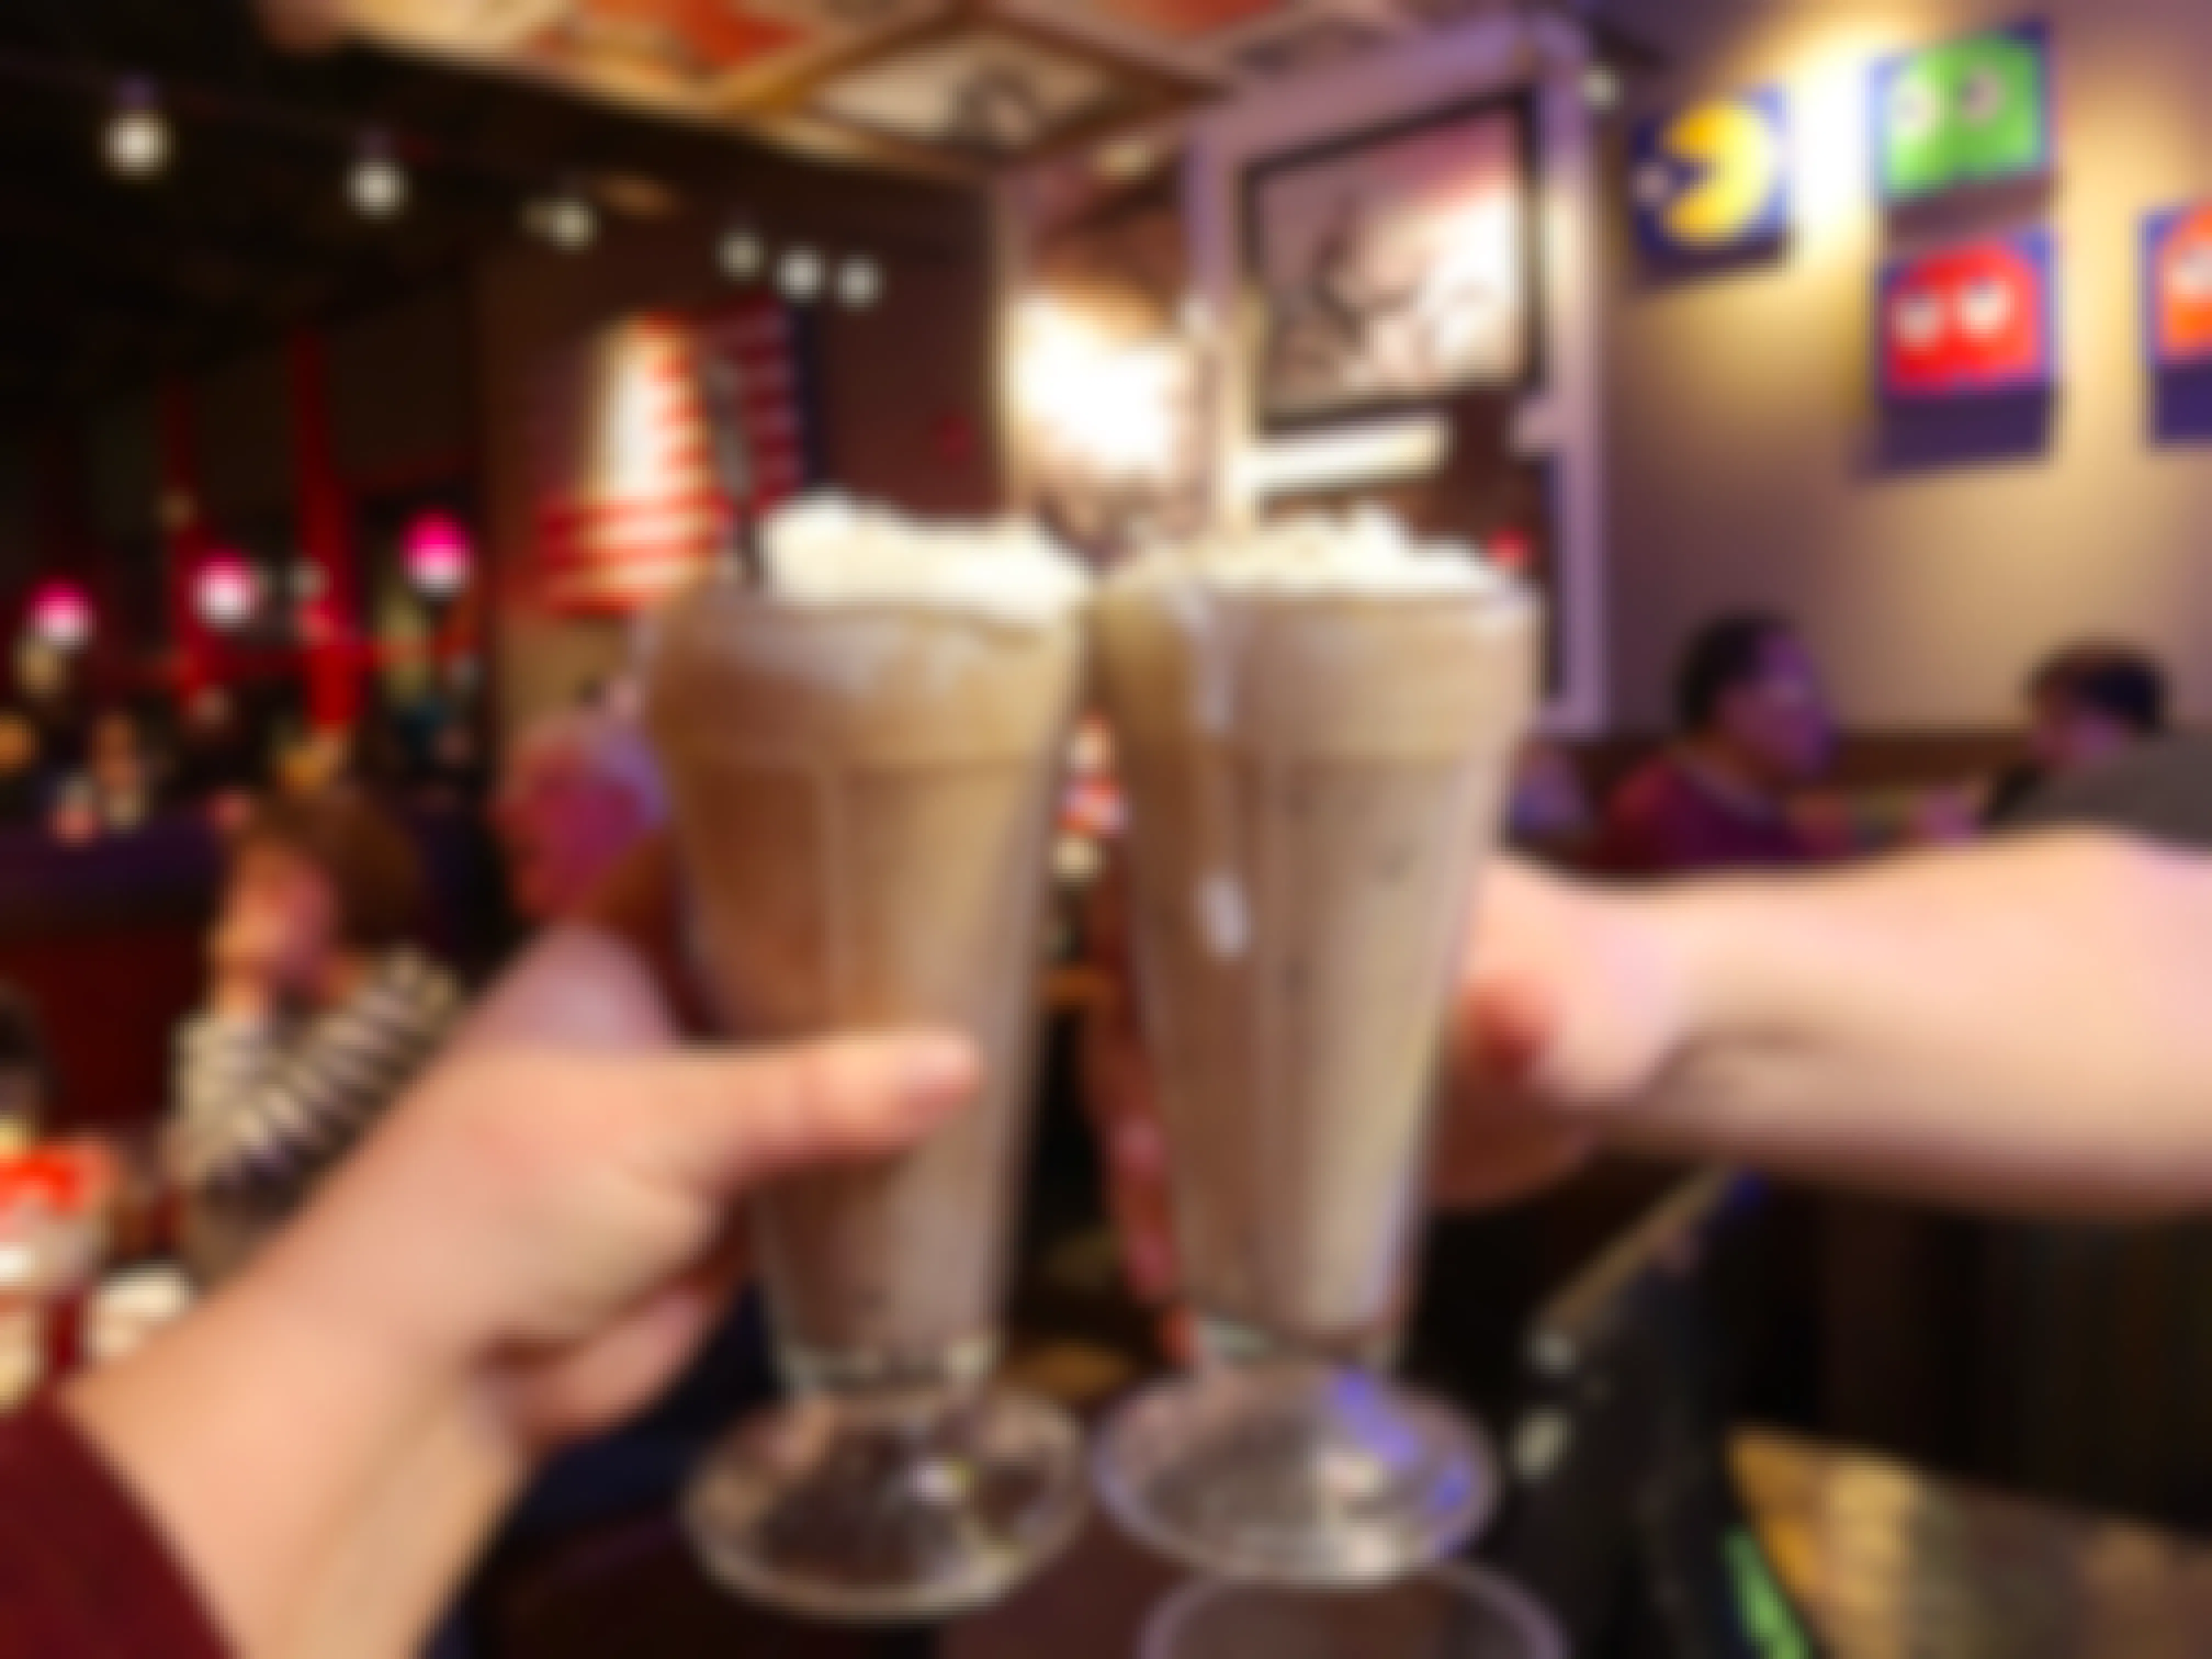 Two people's hands lifting up their milkshakes to cheers inside a Red Robin.